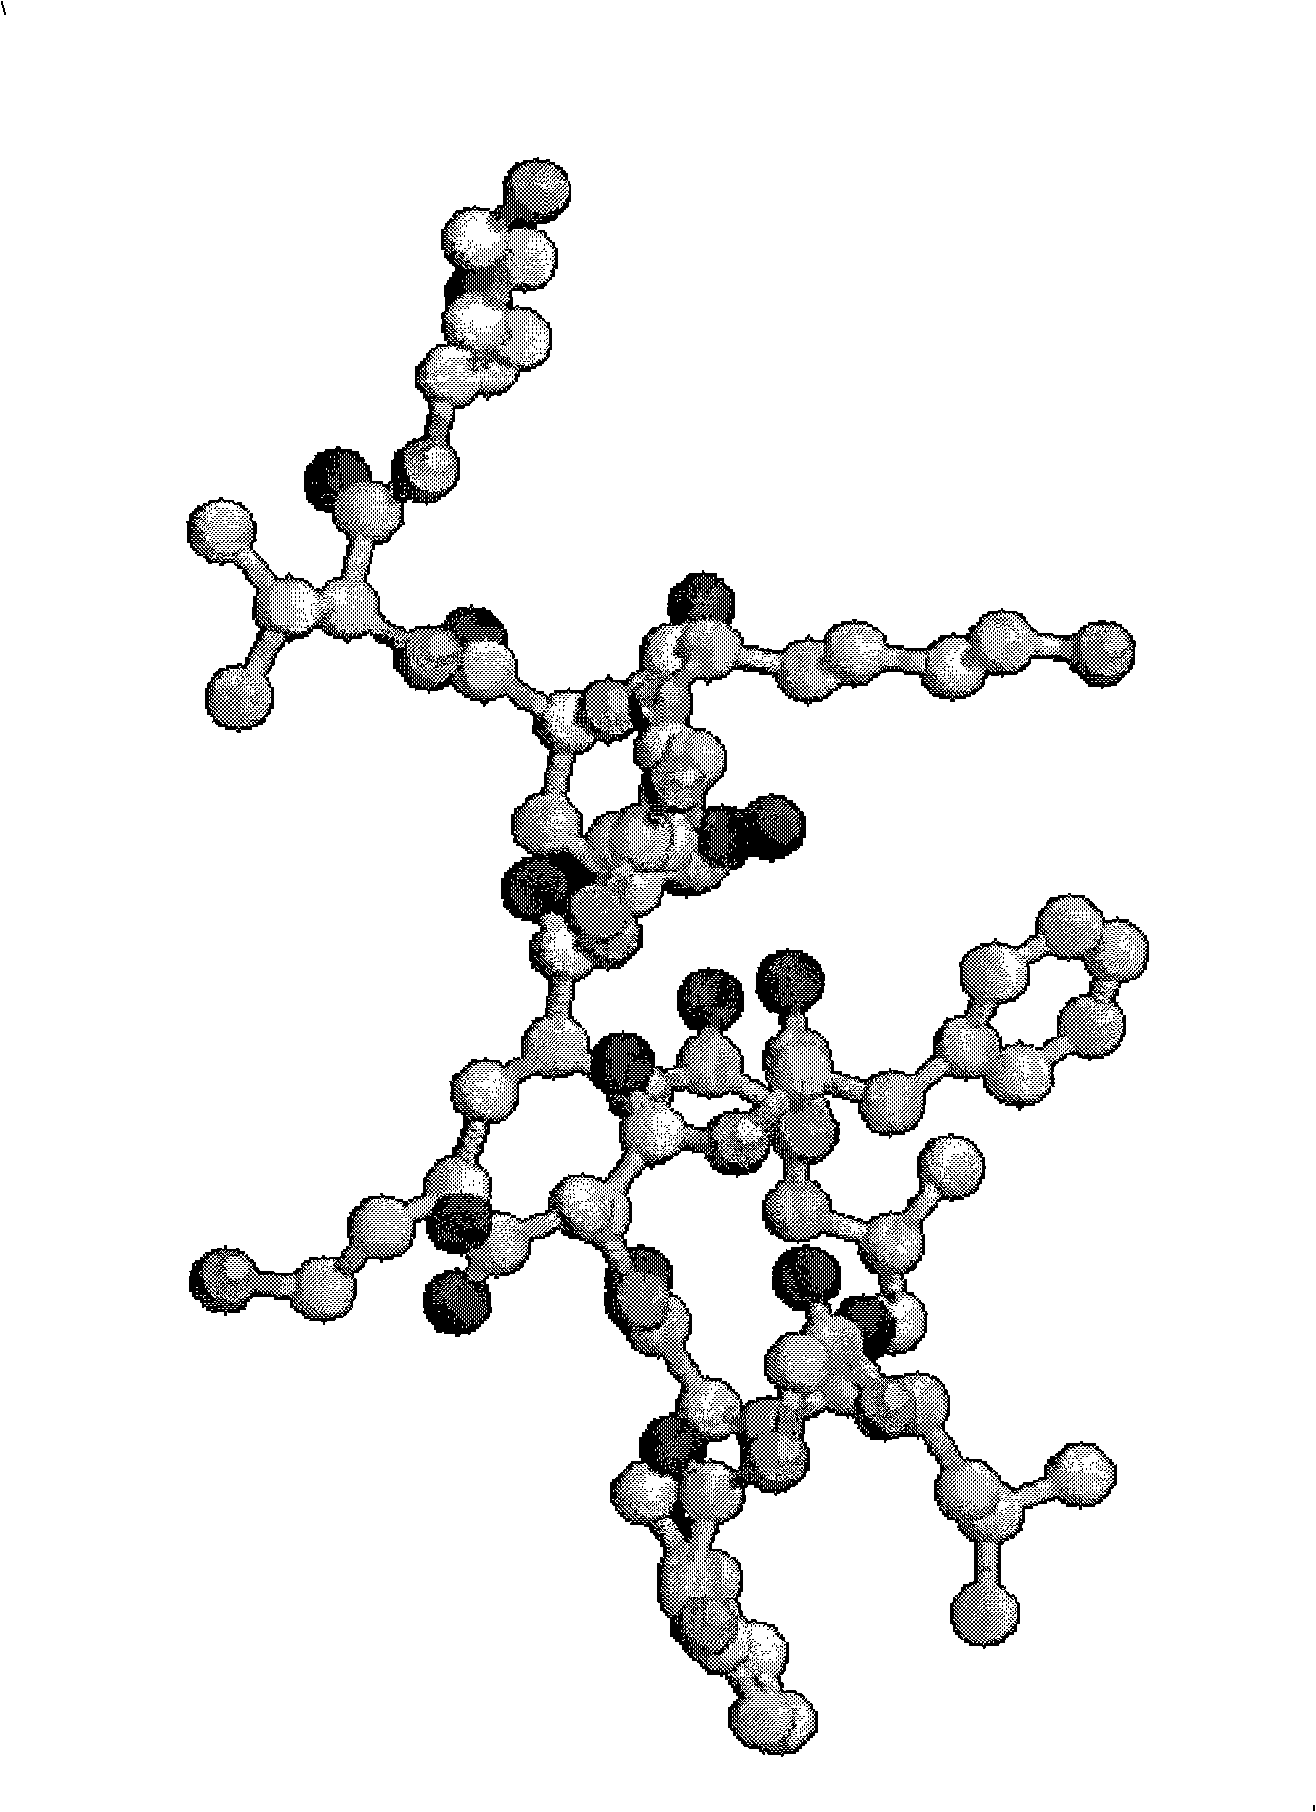 Prediction method for protein three-dimensional structure